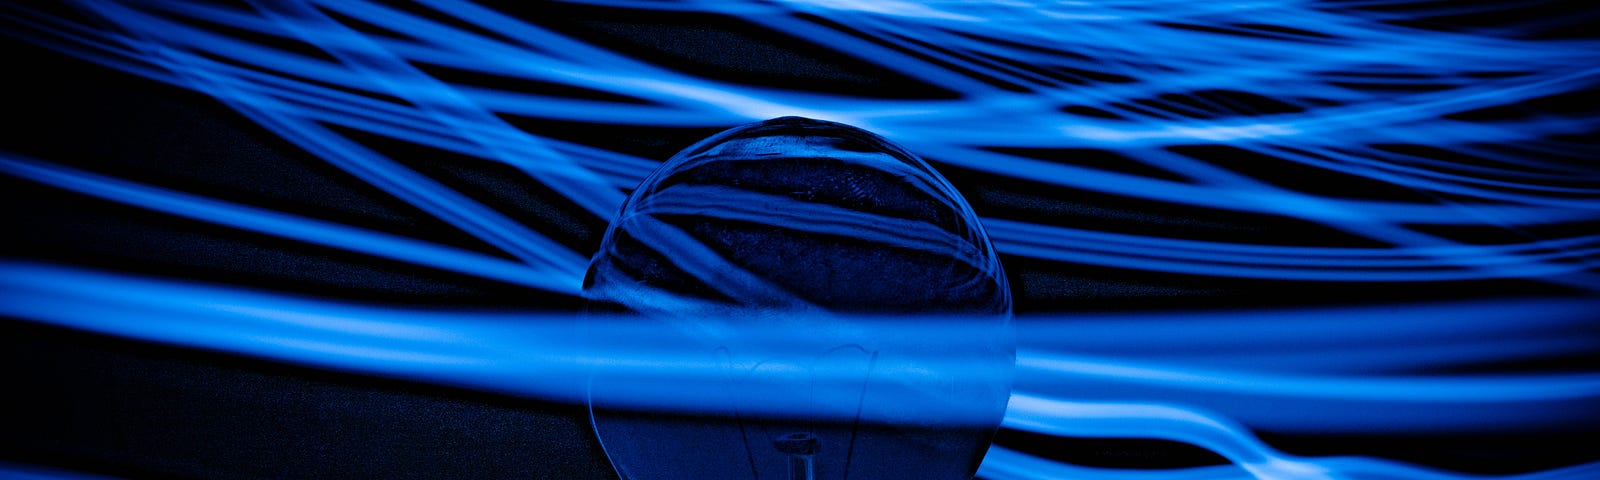 A light bulb extends from the bottom of the image. There are blue strands of light coursing horizontally across the entire image, one in front of the bulb, the rest behind it.